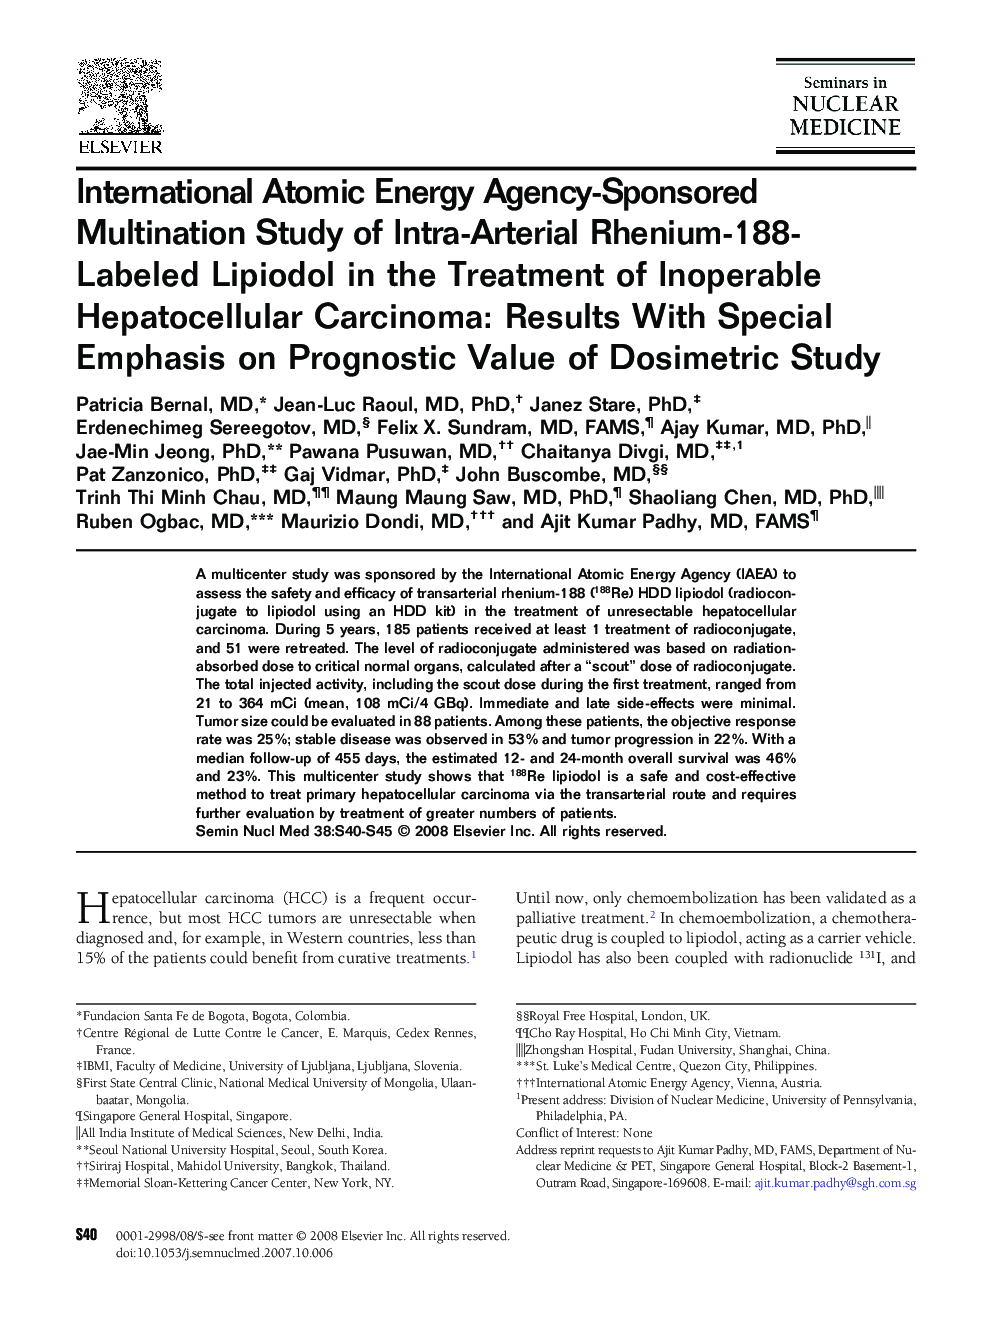 International Atomic Energy Agency-Sponsored Multination Study of Intra-Arterial Rhenium-188-Labeled Lipiodol in the Treatment of Inoperable Hepatocellular Carcinoma: Results With Special Emphasis on Prognostic Value of Dosimetric Study 